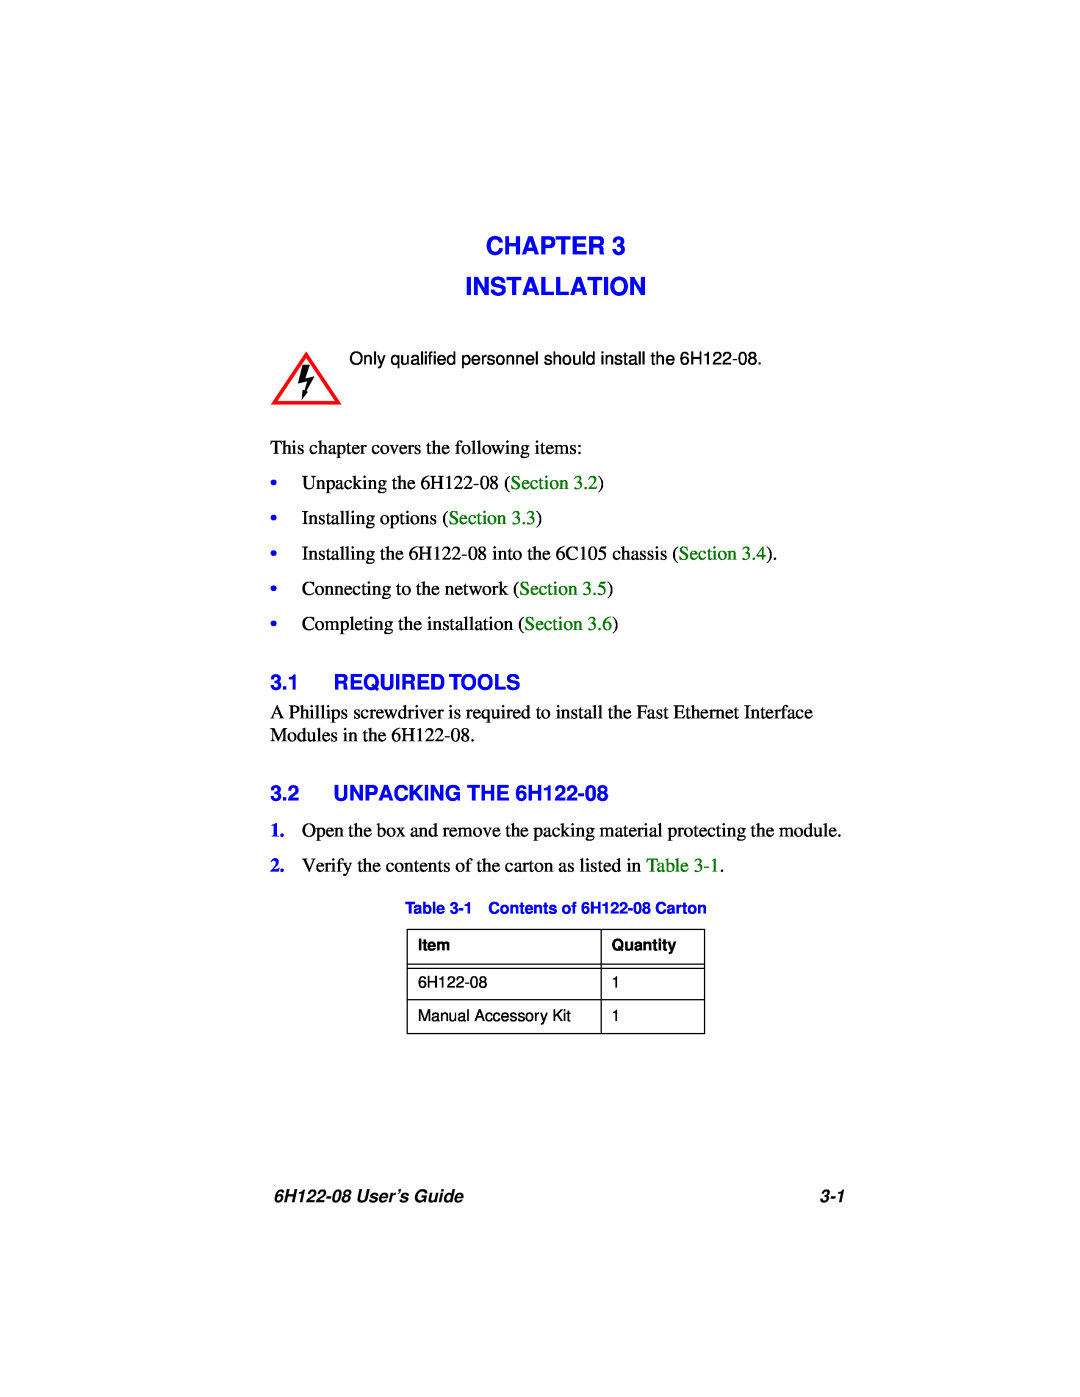 Cabletron Systems manual Chapter Installation, Required Tools, UNPACKING THE 6H122-08 